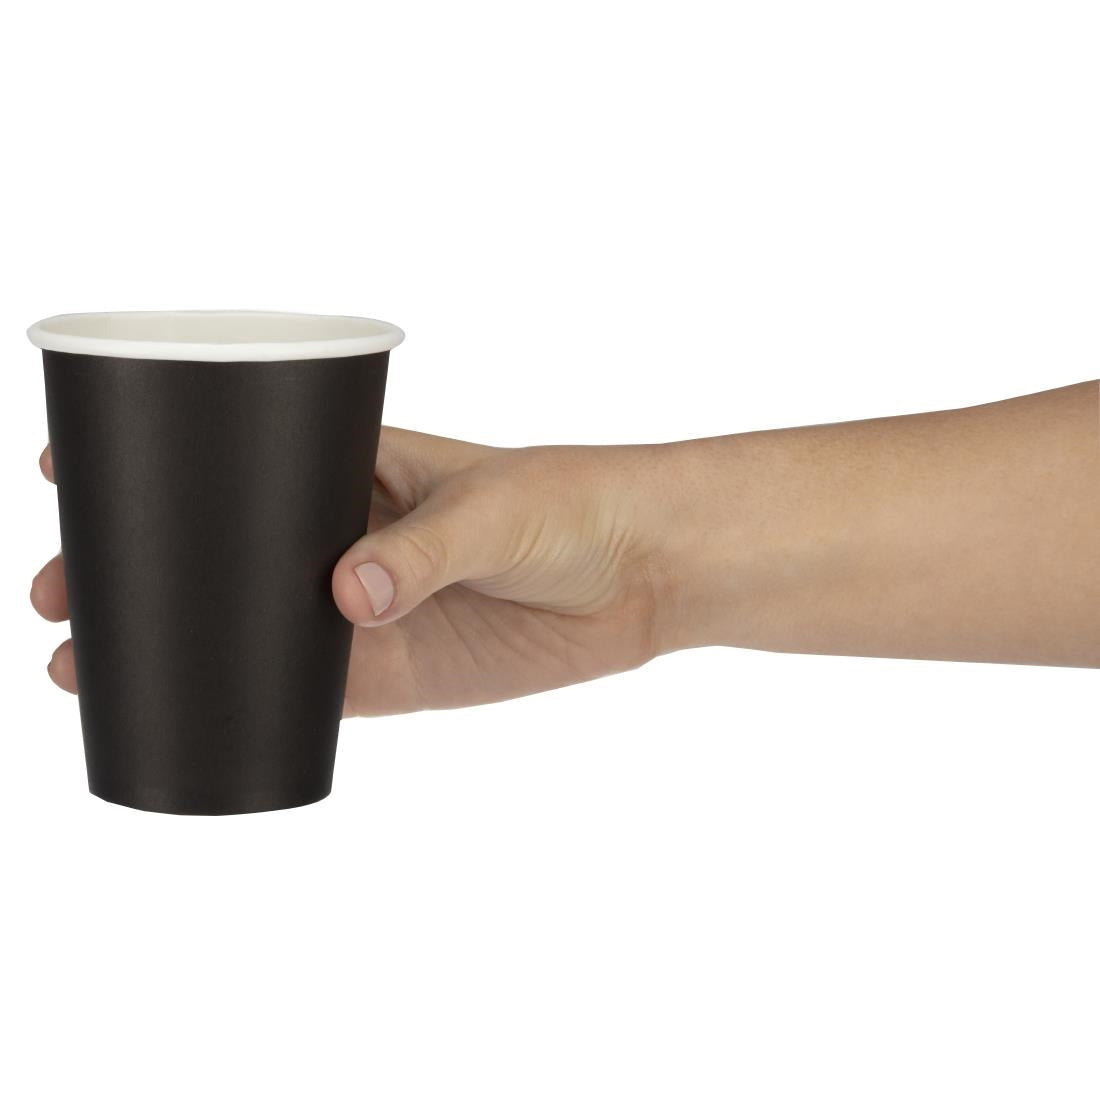 GF043 Fiesta Recyclable Coffee Cups Single Wall Black 340ml / 12oz (Pack of 50) JD Catering Equipment Solutions Ltd